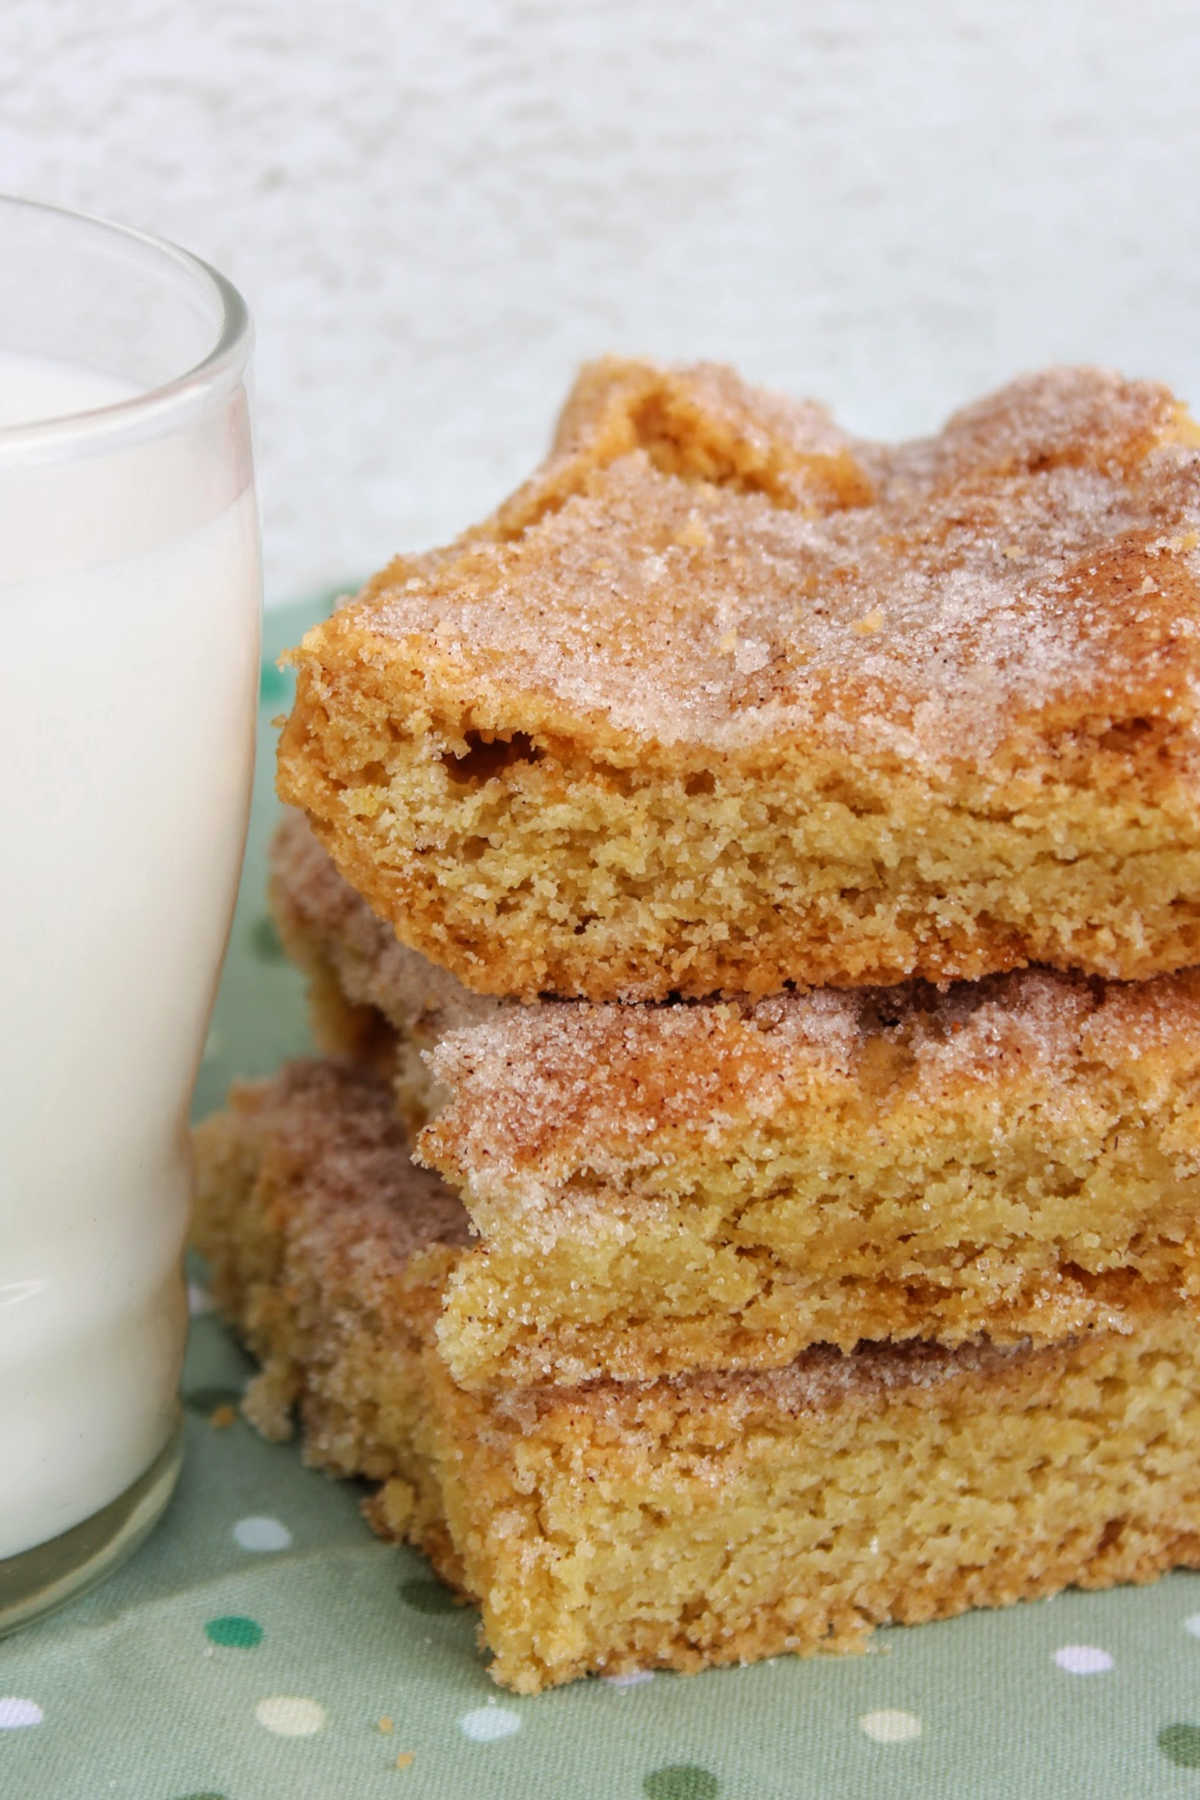 Stacked snickerdoodle bars next to glass of milk.